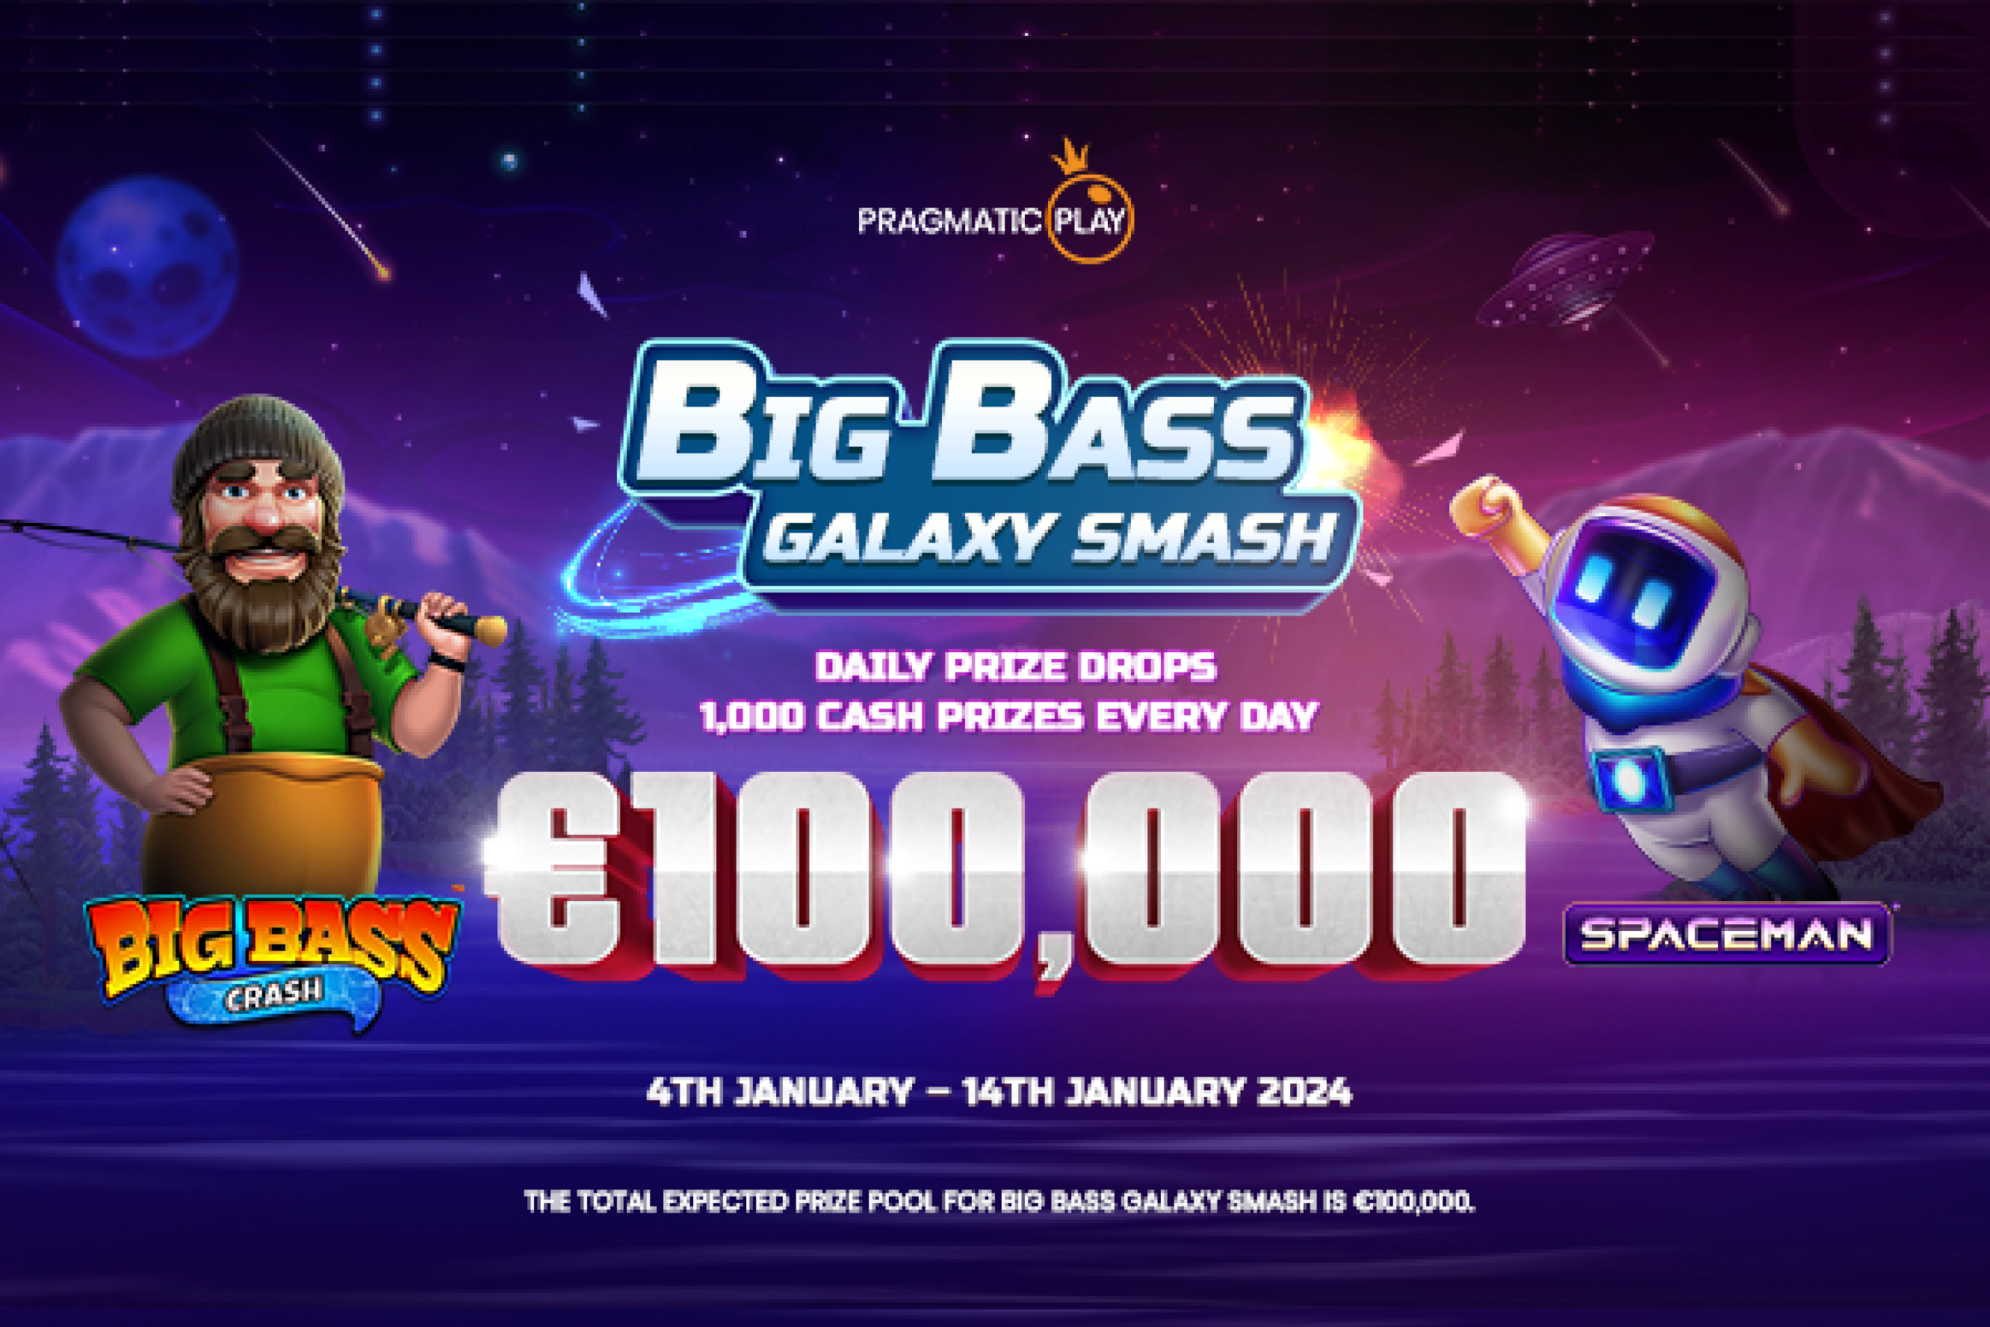 Featured image for “【プロモ】BIG BASS GALAXY SMASH”